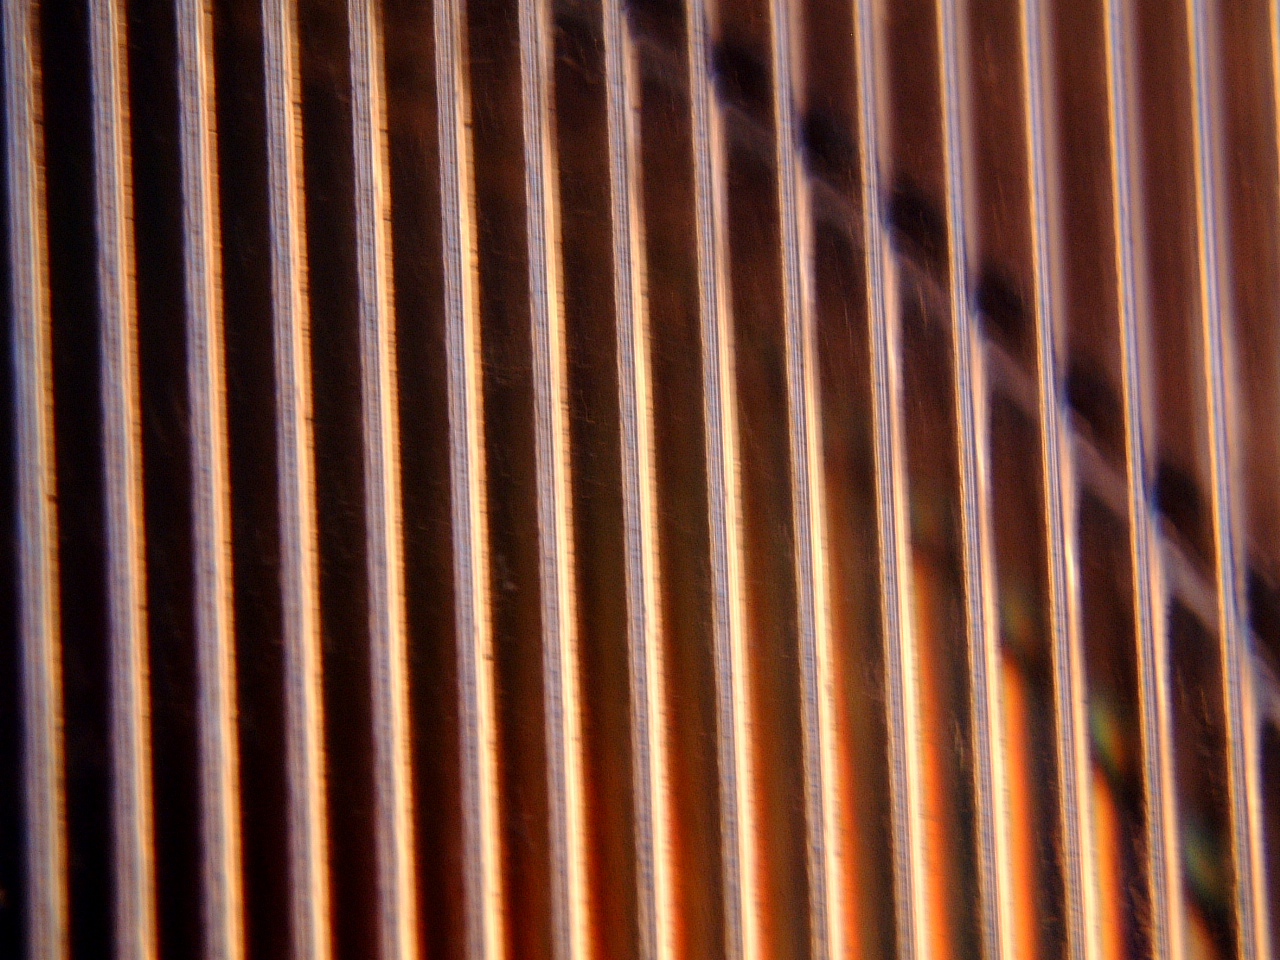 maartent wood grating lines absolutely no idea what i am looking at